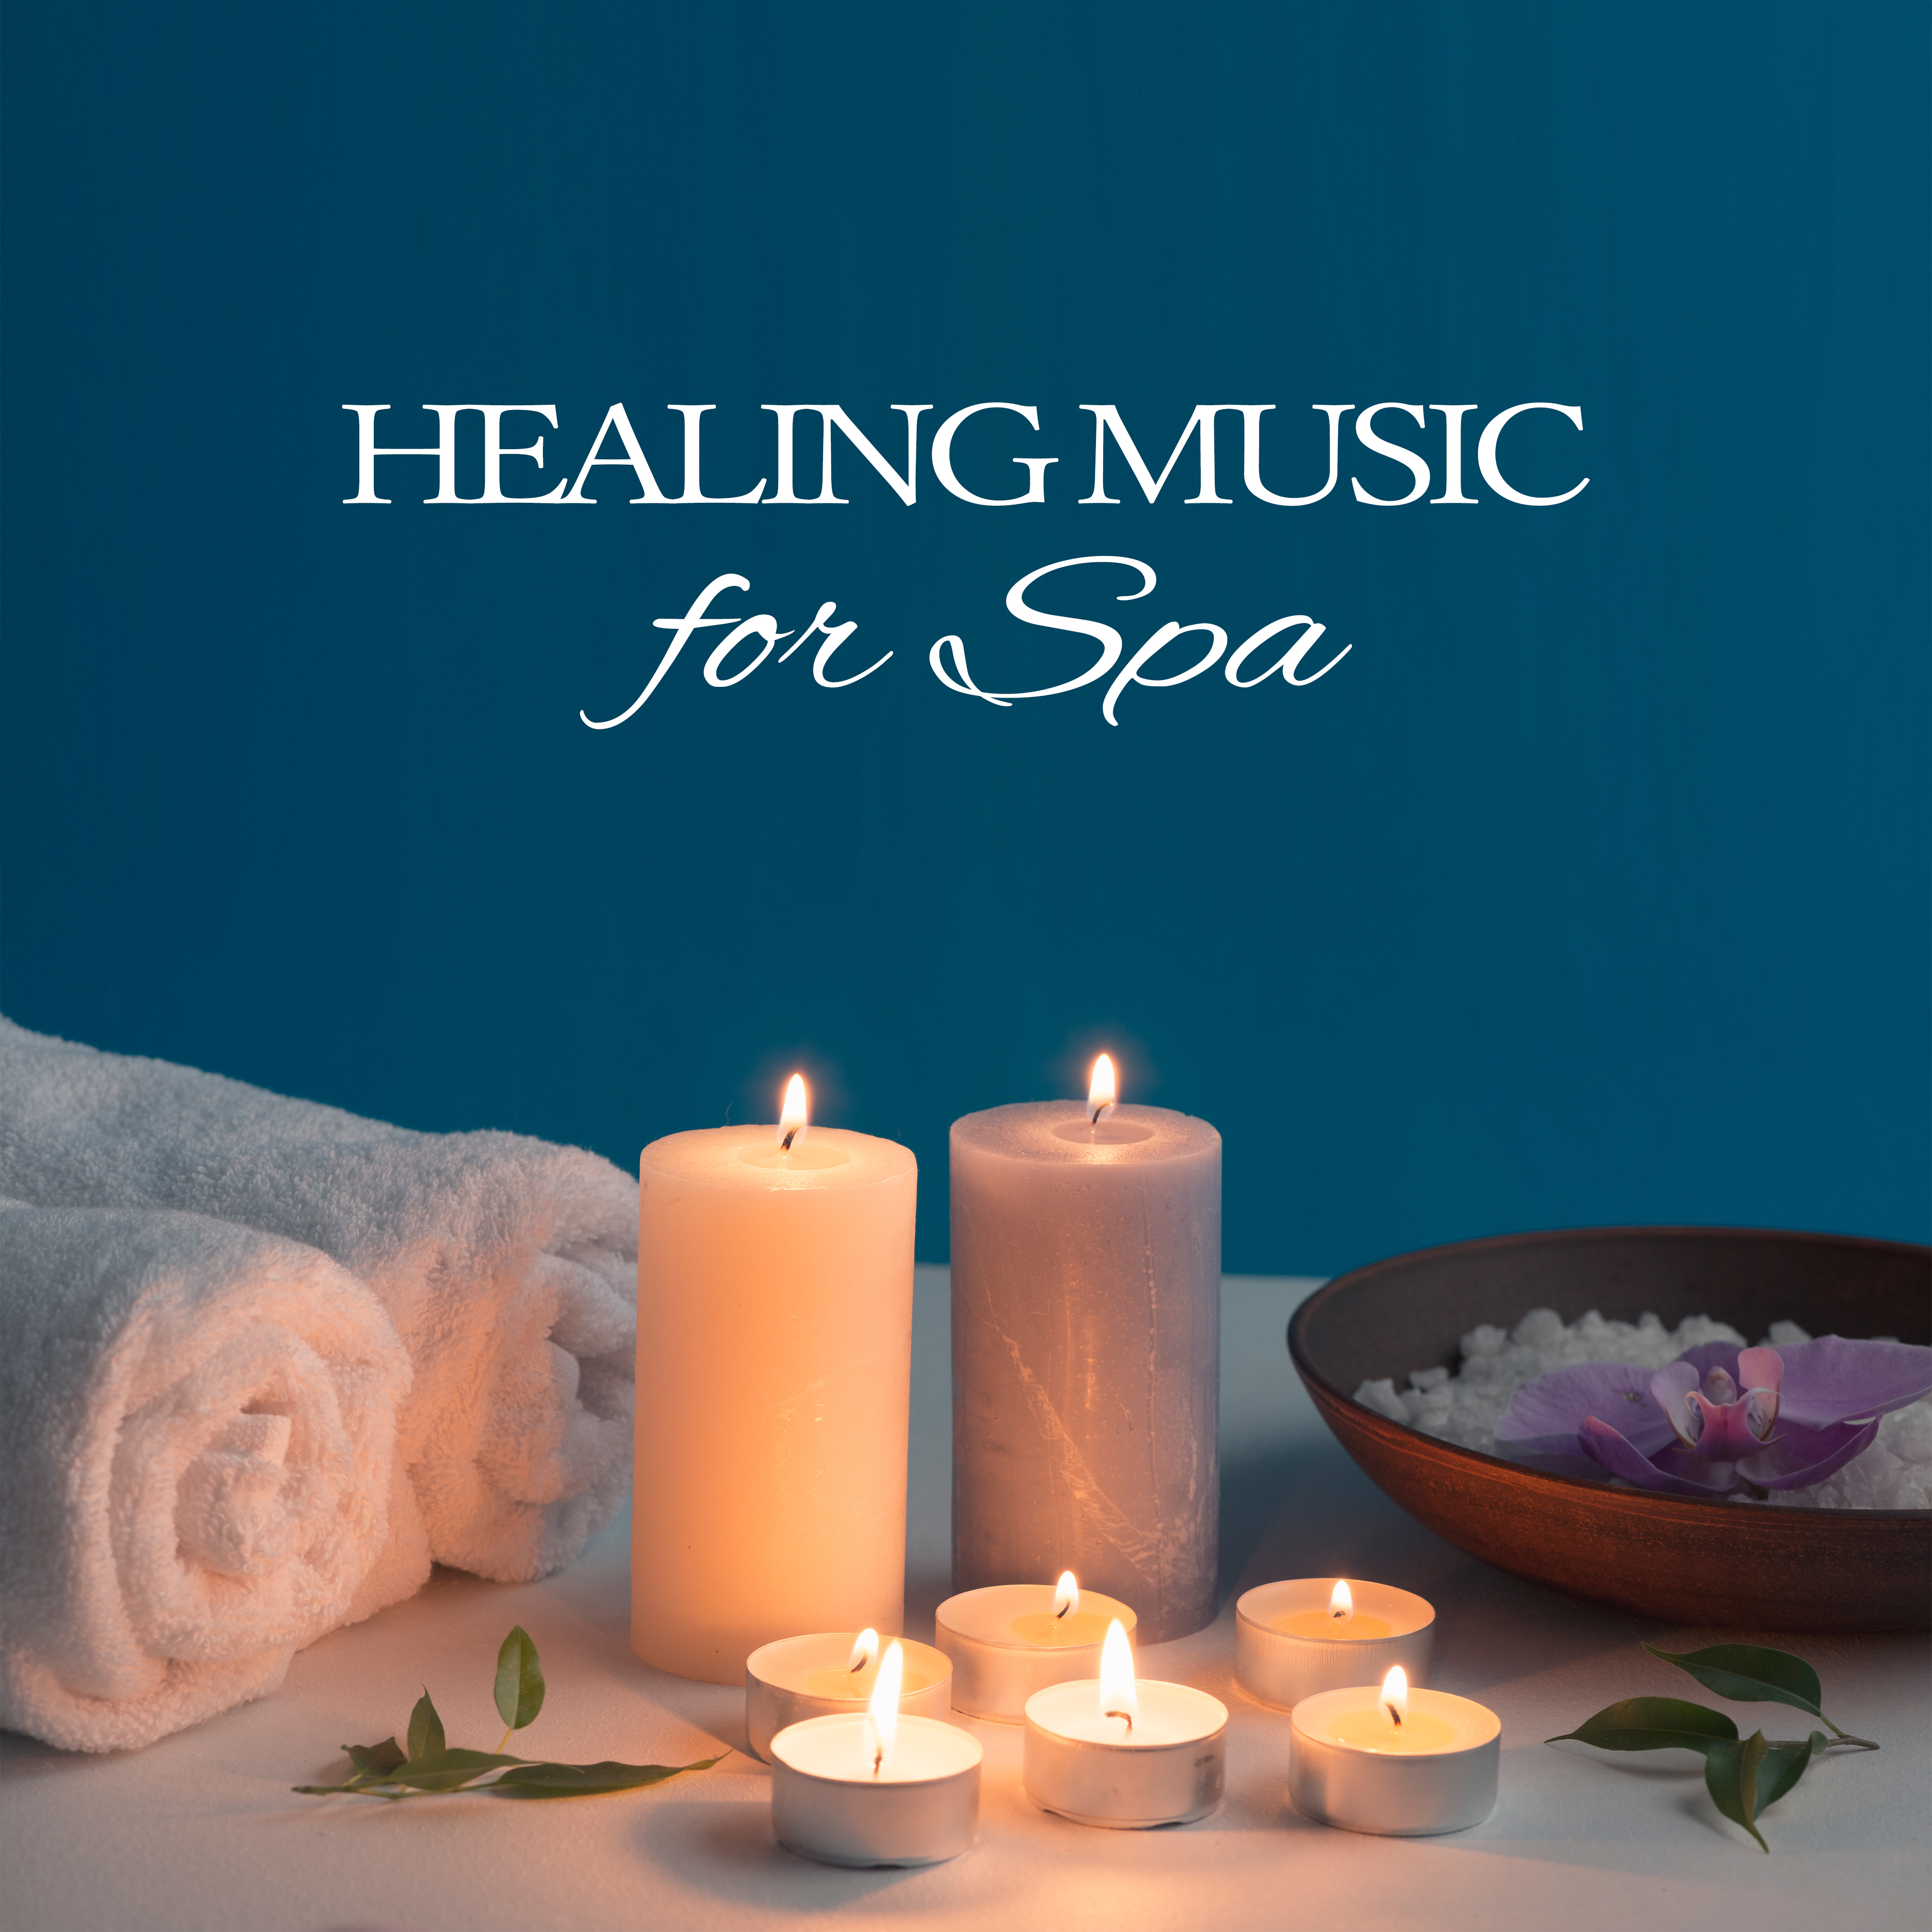 Healing Music for Spa